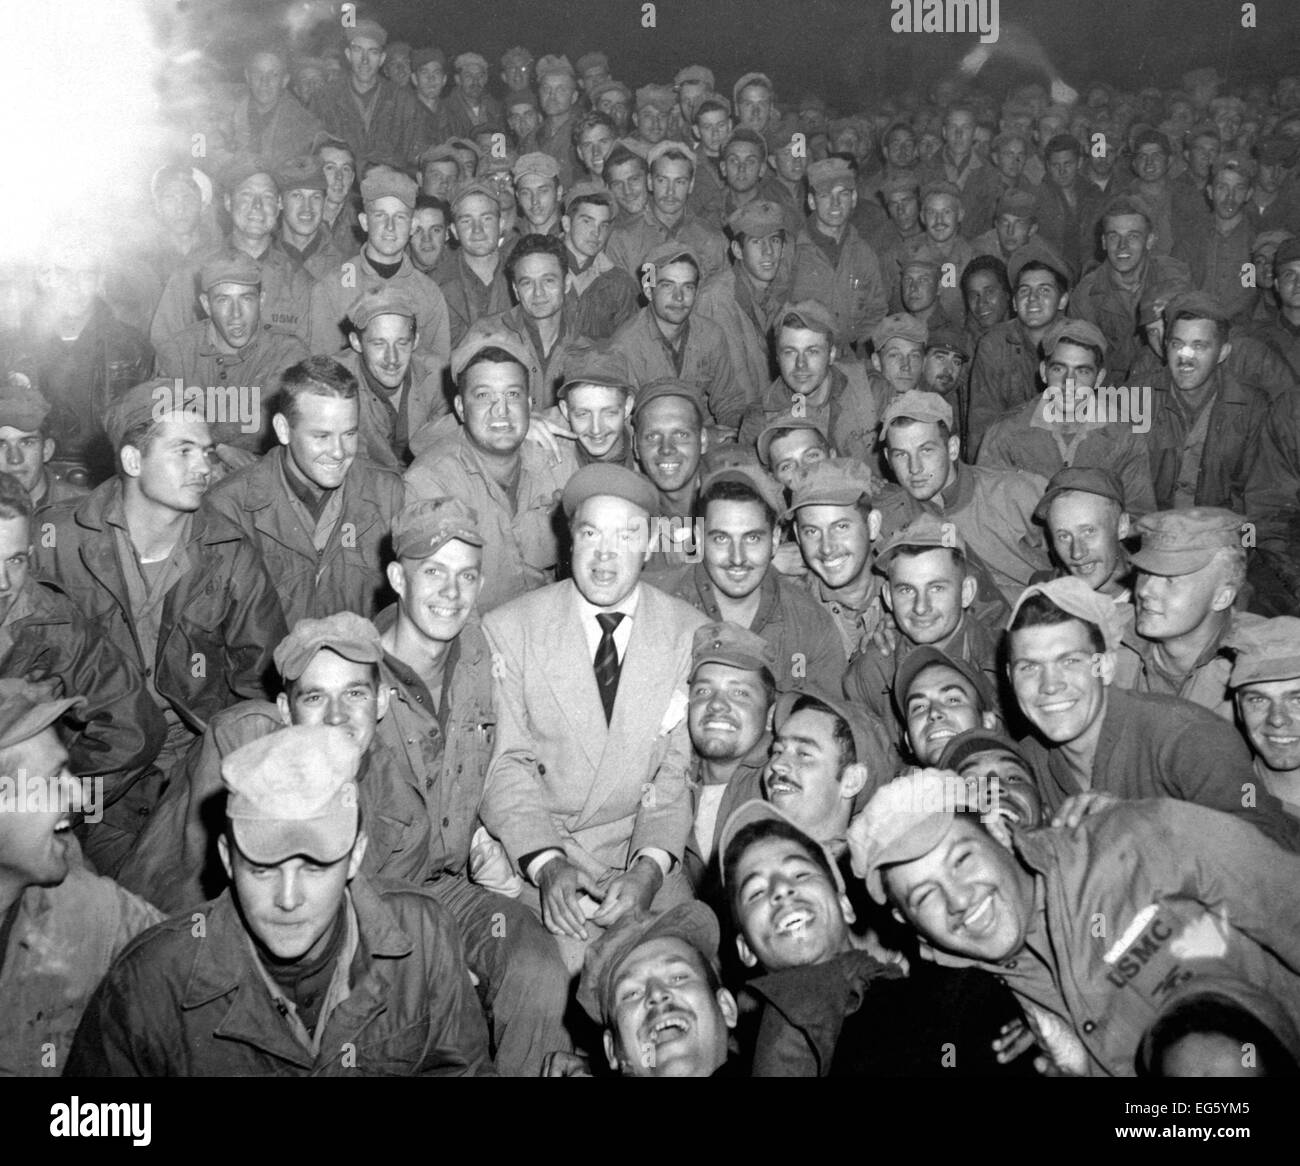 KOREAN WAR (1950-1953) Bob Hope sits with men of X Corps watching his troupe  entertain at Womsan, Korea.  October 26, 1950.  Photo : Cpl. Alex Klein.  (US Army)  NARA FILE #  111-SC-351586 WAR & CONFLICT BOOK #:  1469 Stock Photo